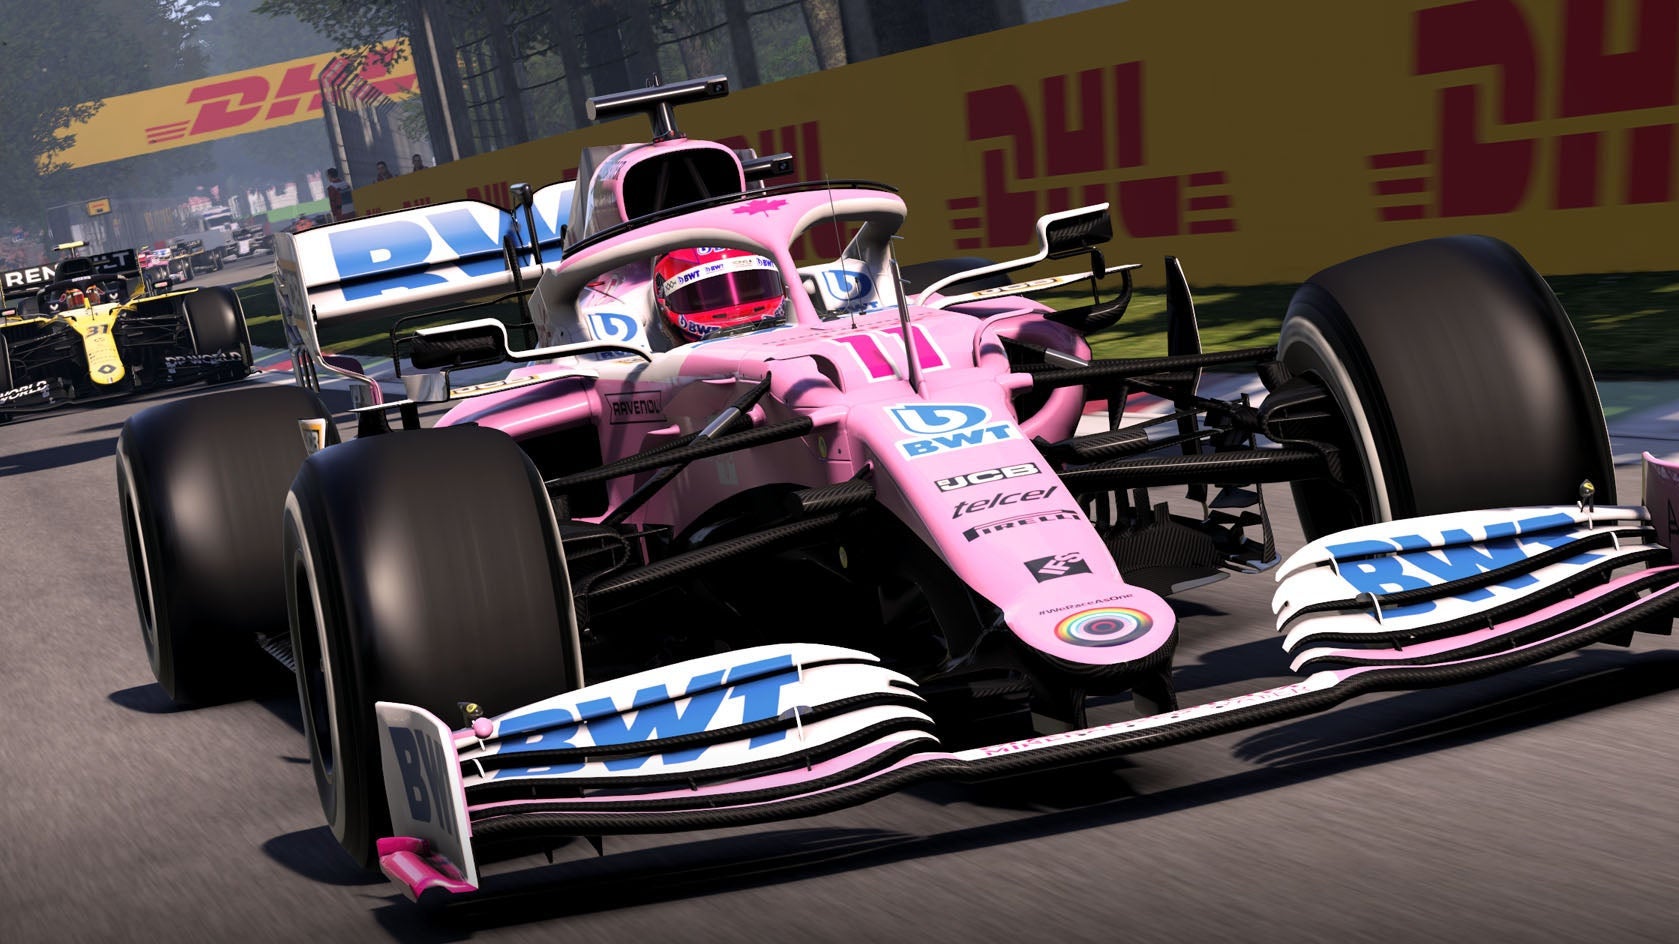 Image for Take-Two are buying F1 devs Codemasters